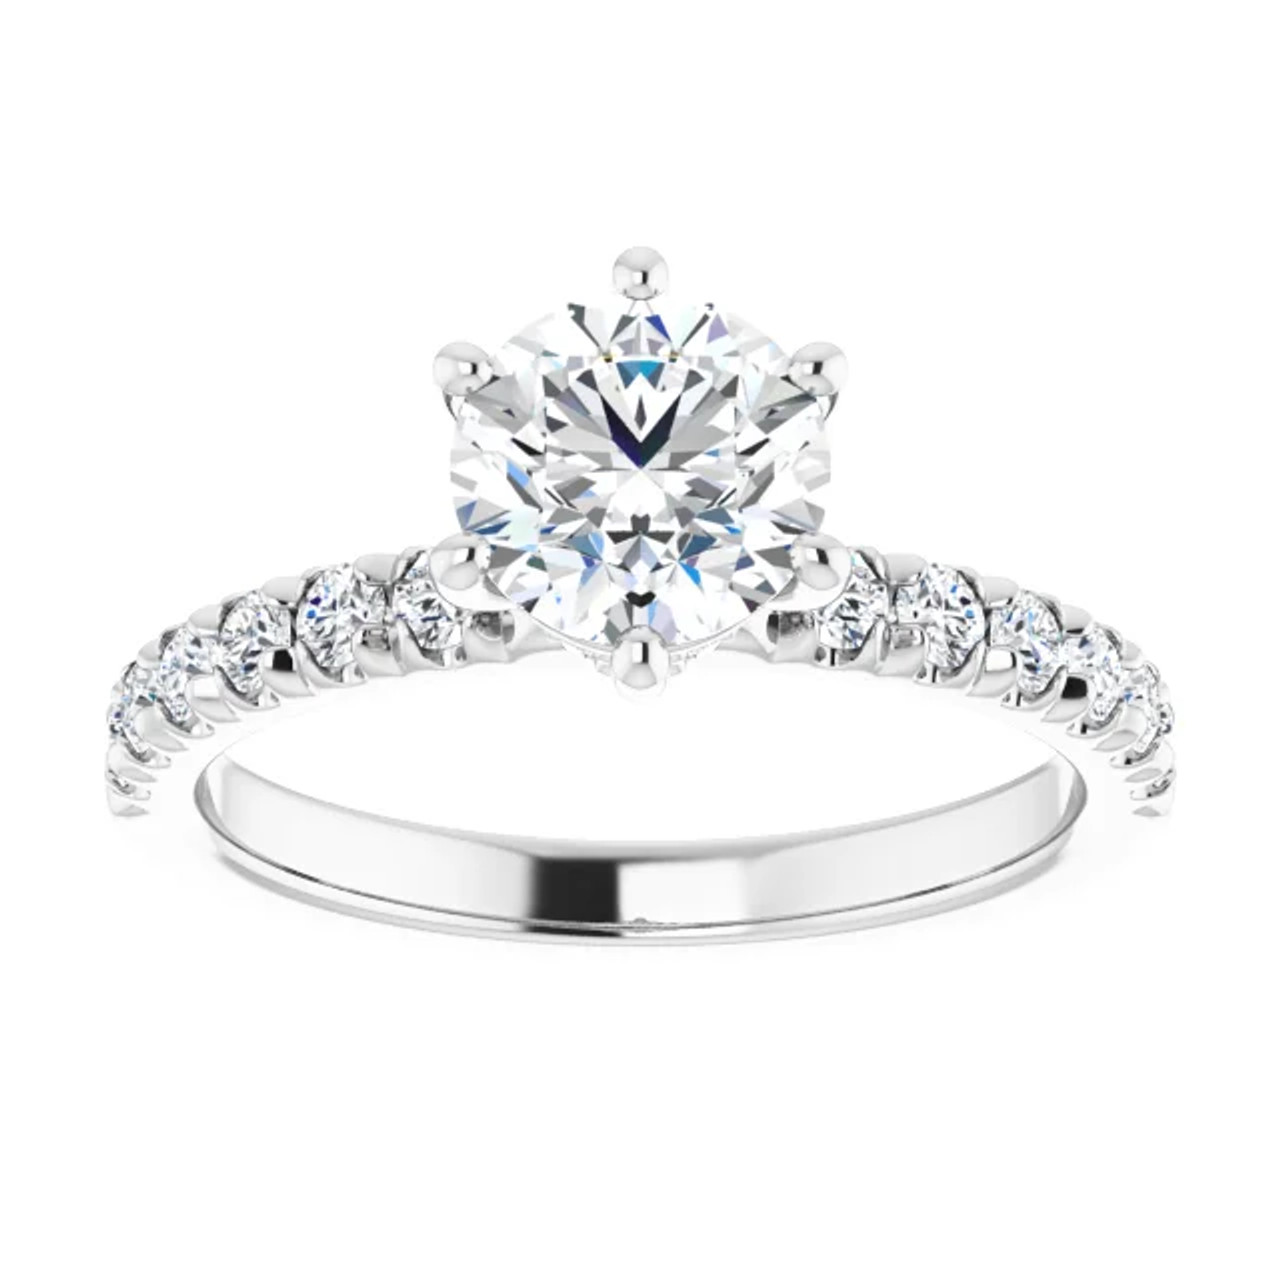 Brittany Hidden Halo Straight Engagement Ring Setting | Gage Diamonds